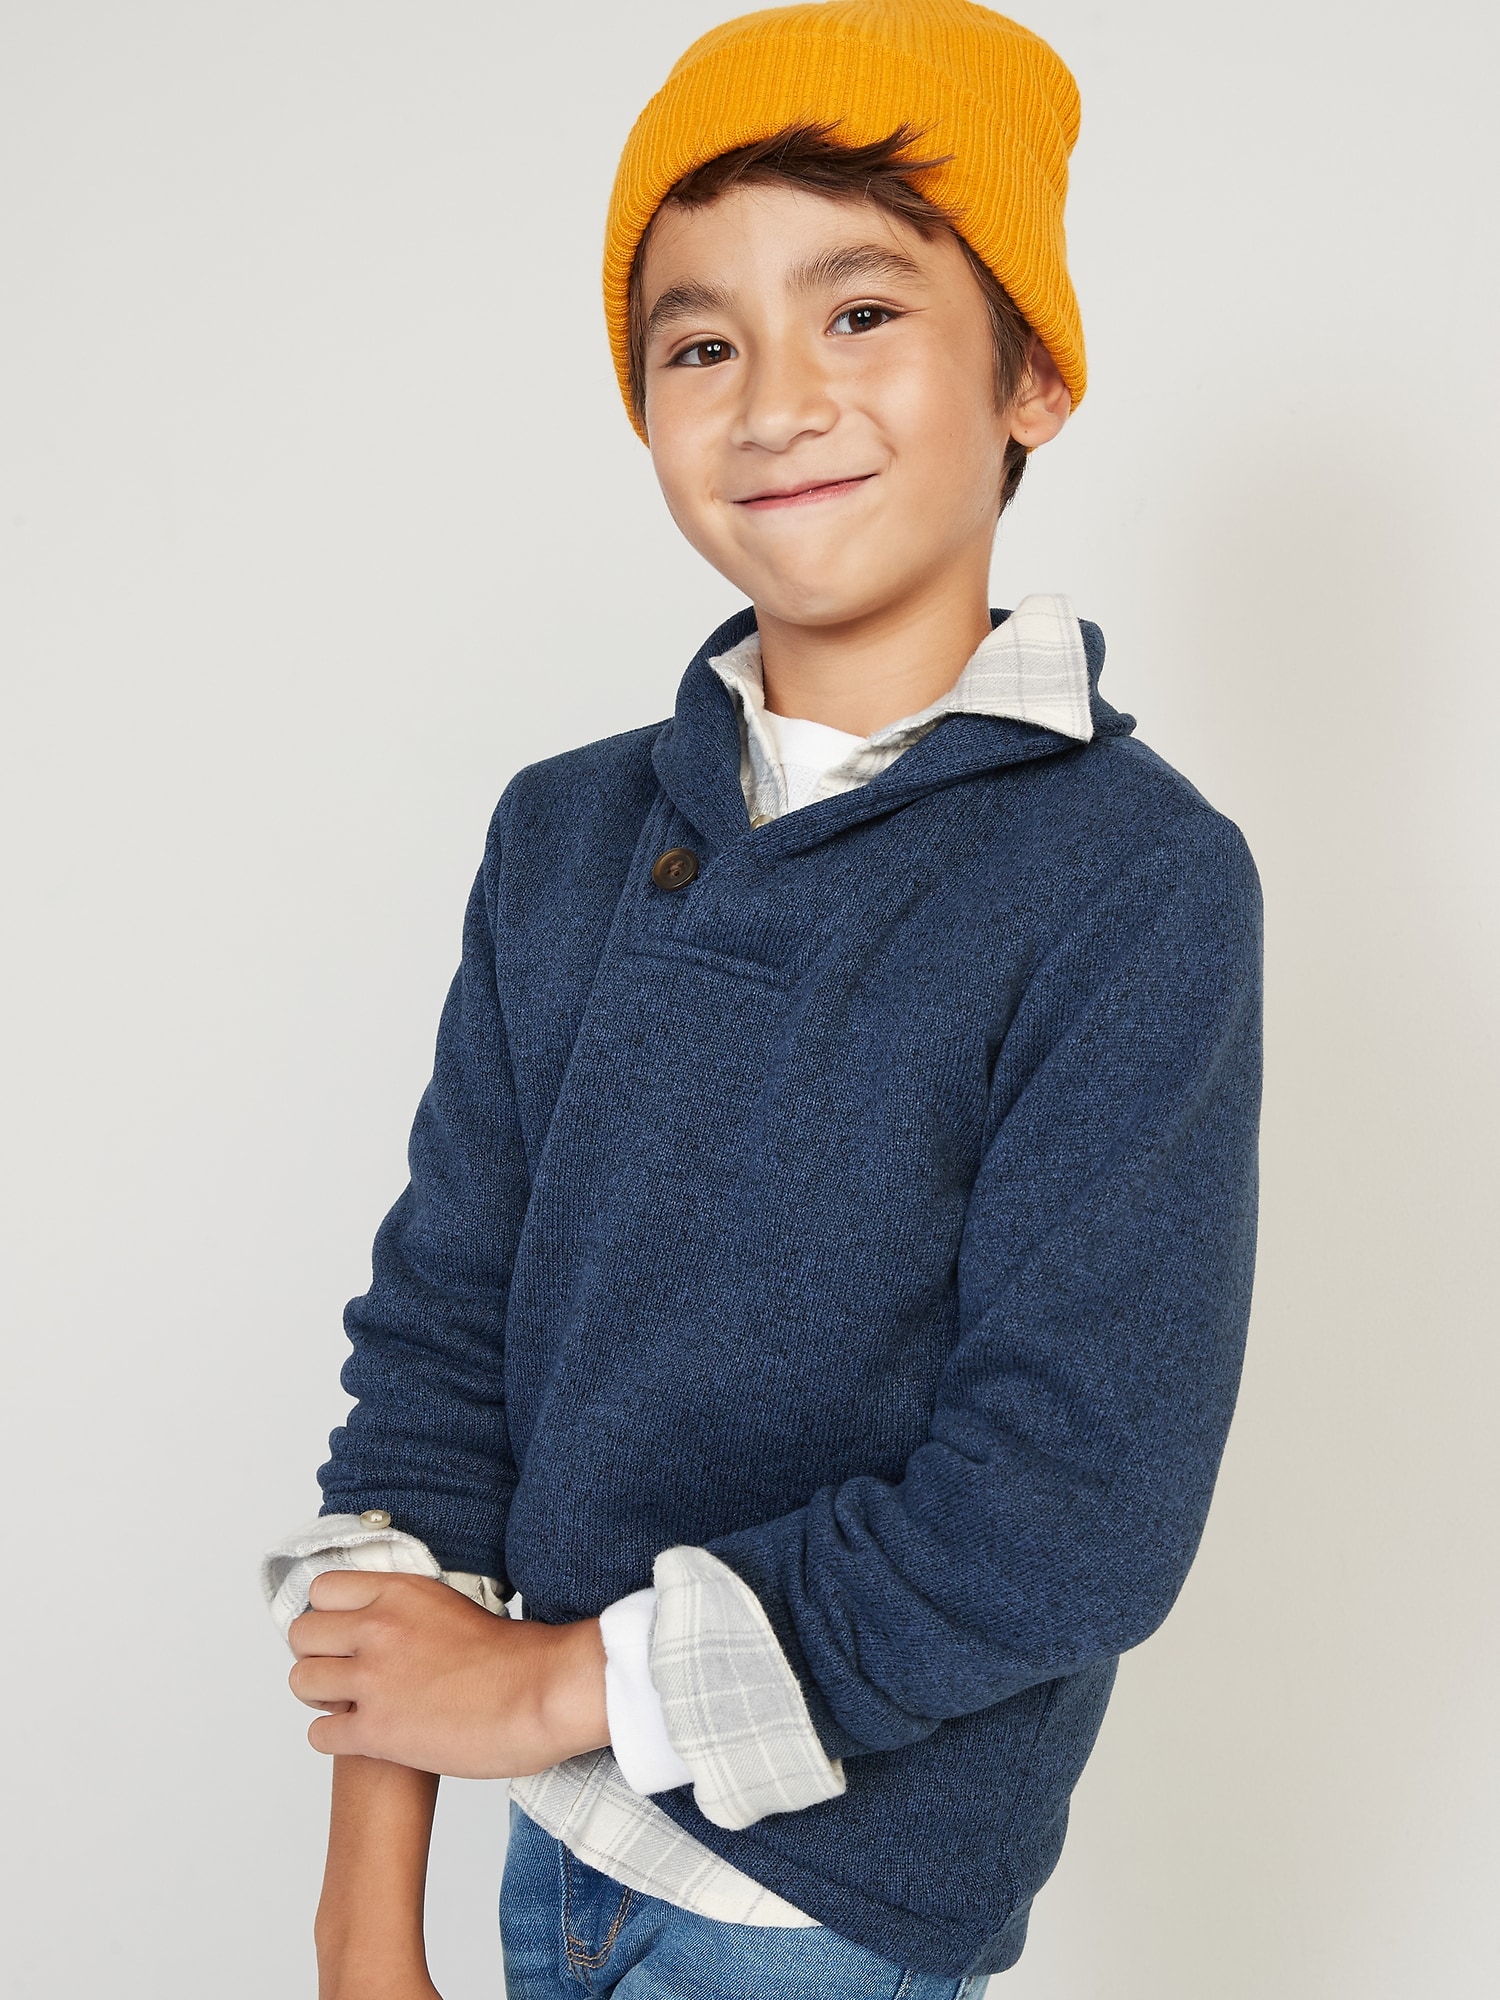 Shawl-Collar Sweater-Fleece Pullover for Boys | Old Navy